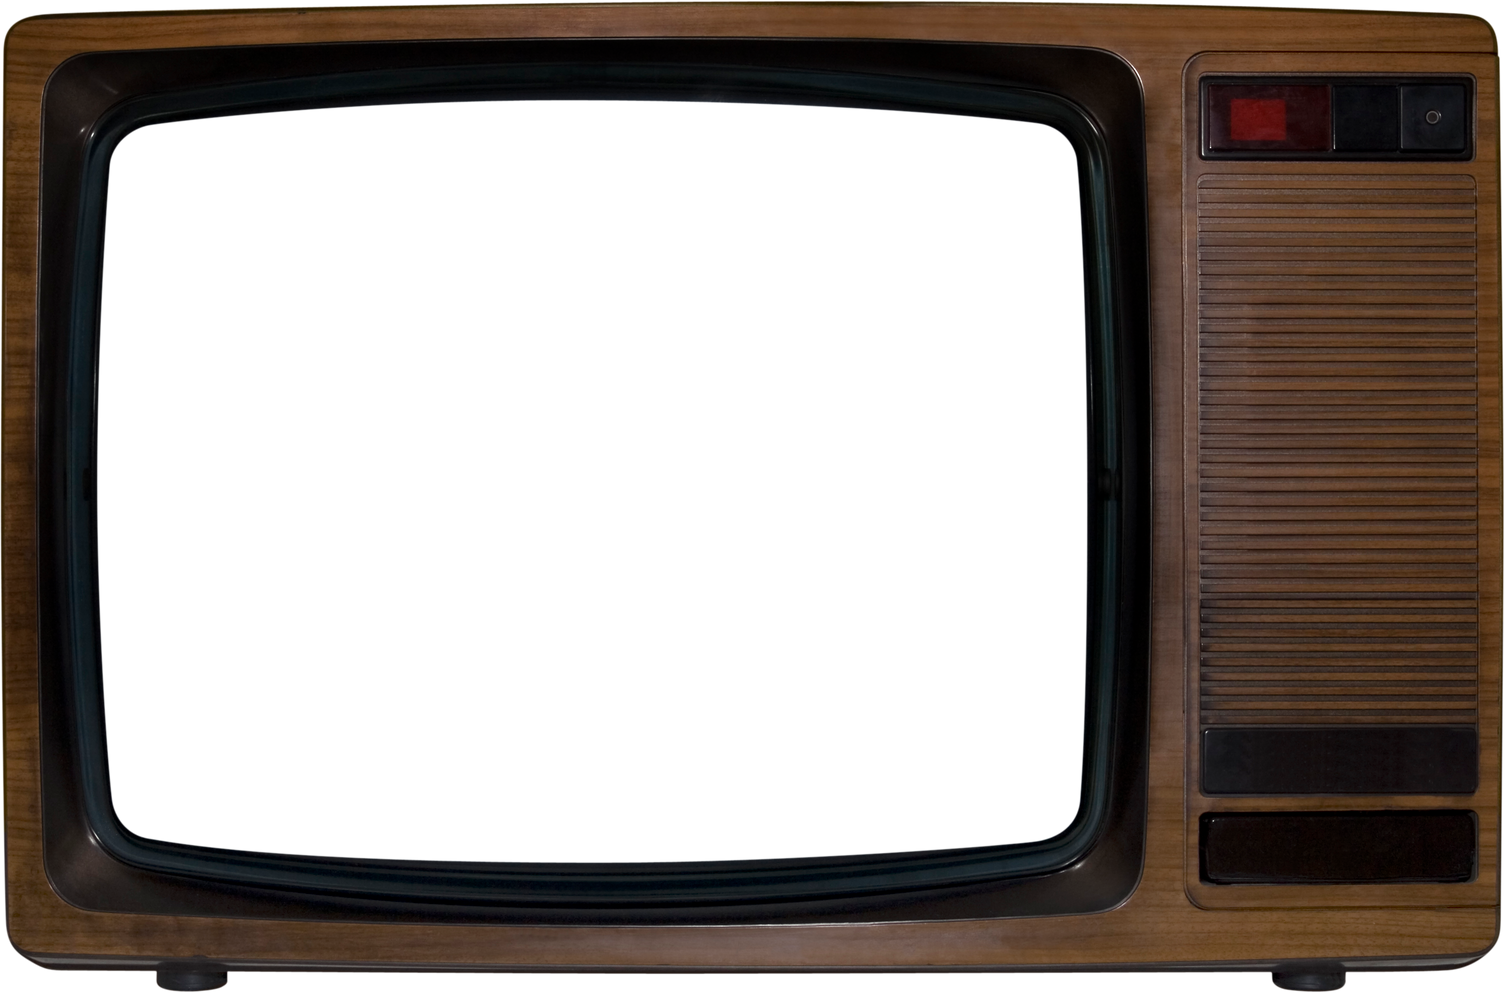 An Old Retro Television